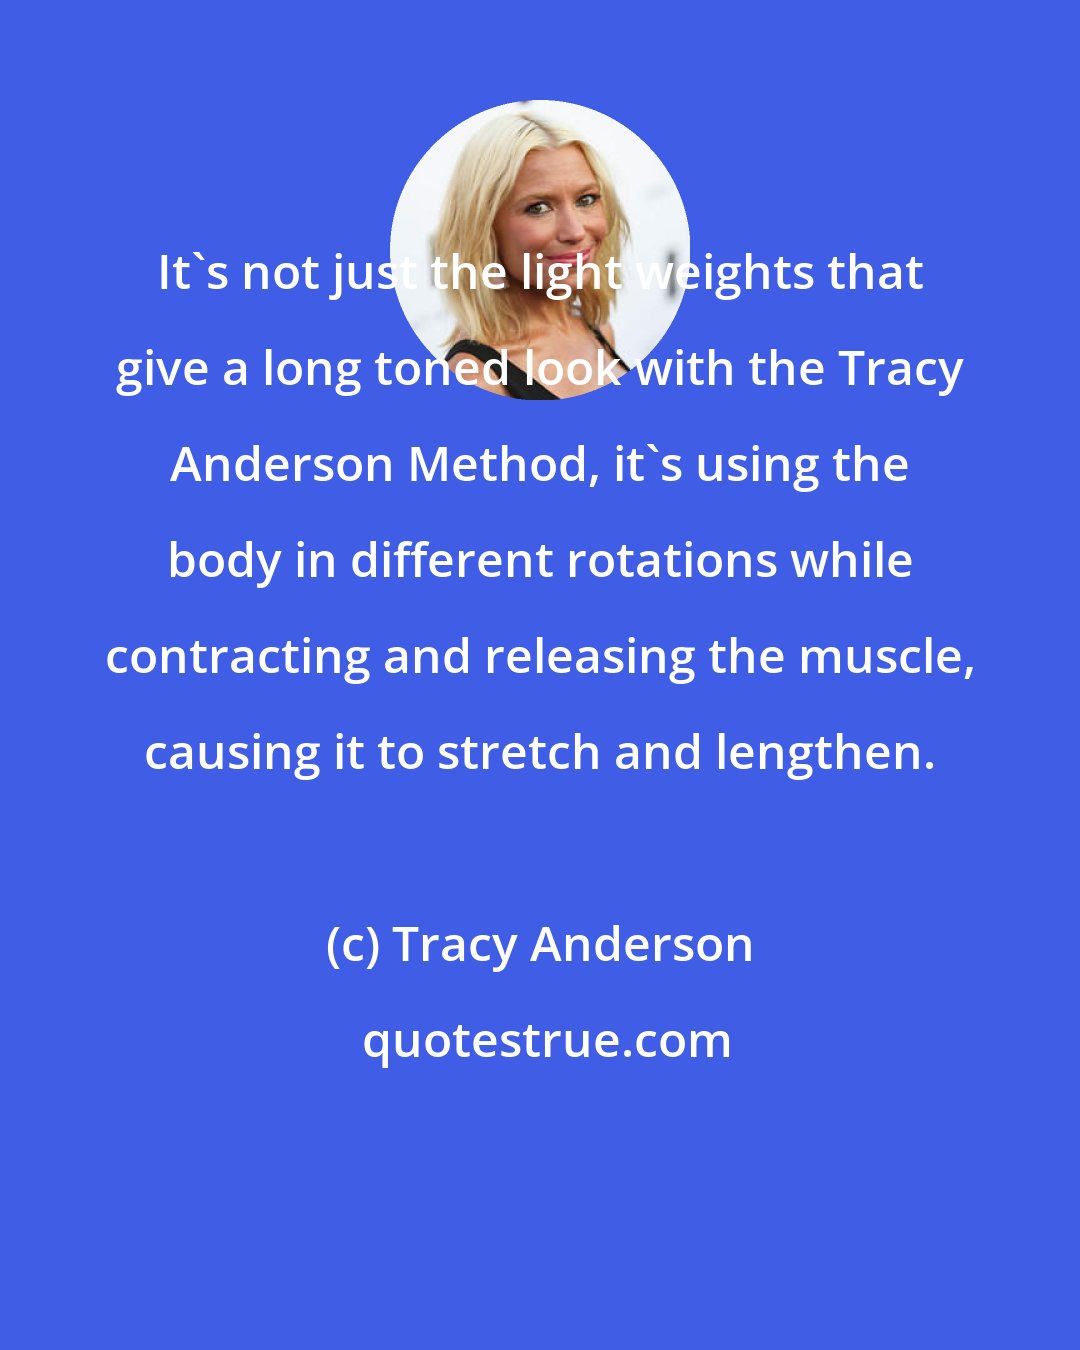 Tracy Anderson: It's not just the light weights that give a long toned look with the Tracy Anderson Method, it's using the body in different rotations while contracting and releasing the muscle, causing it to stretch and lengthen.